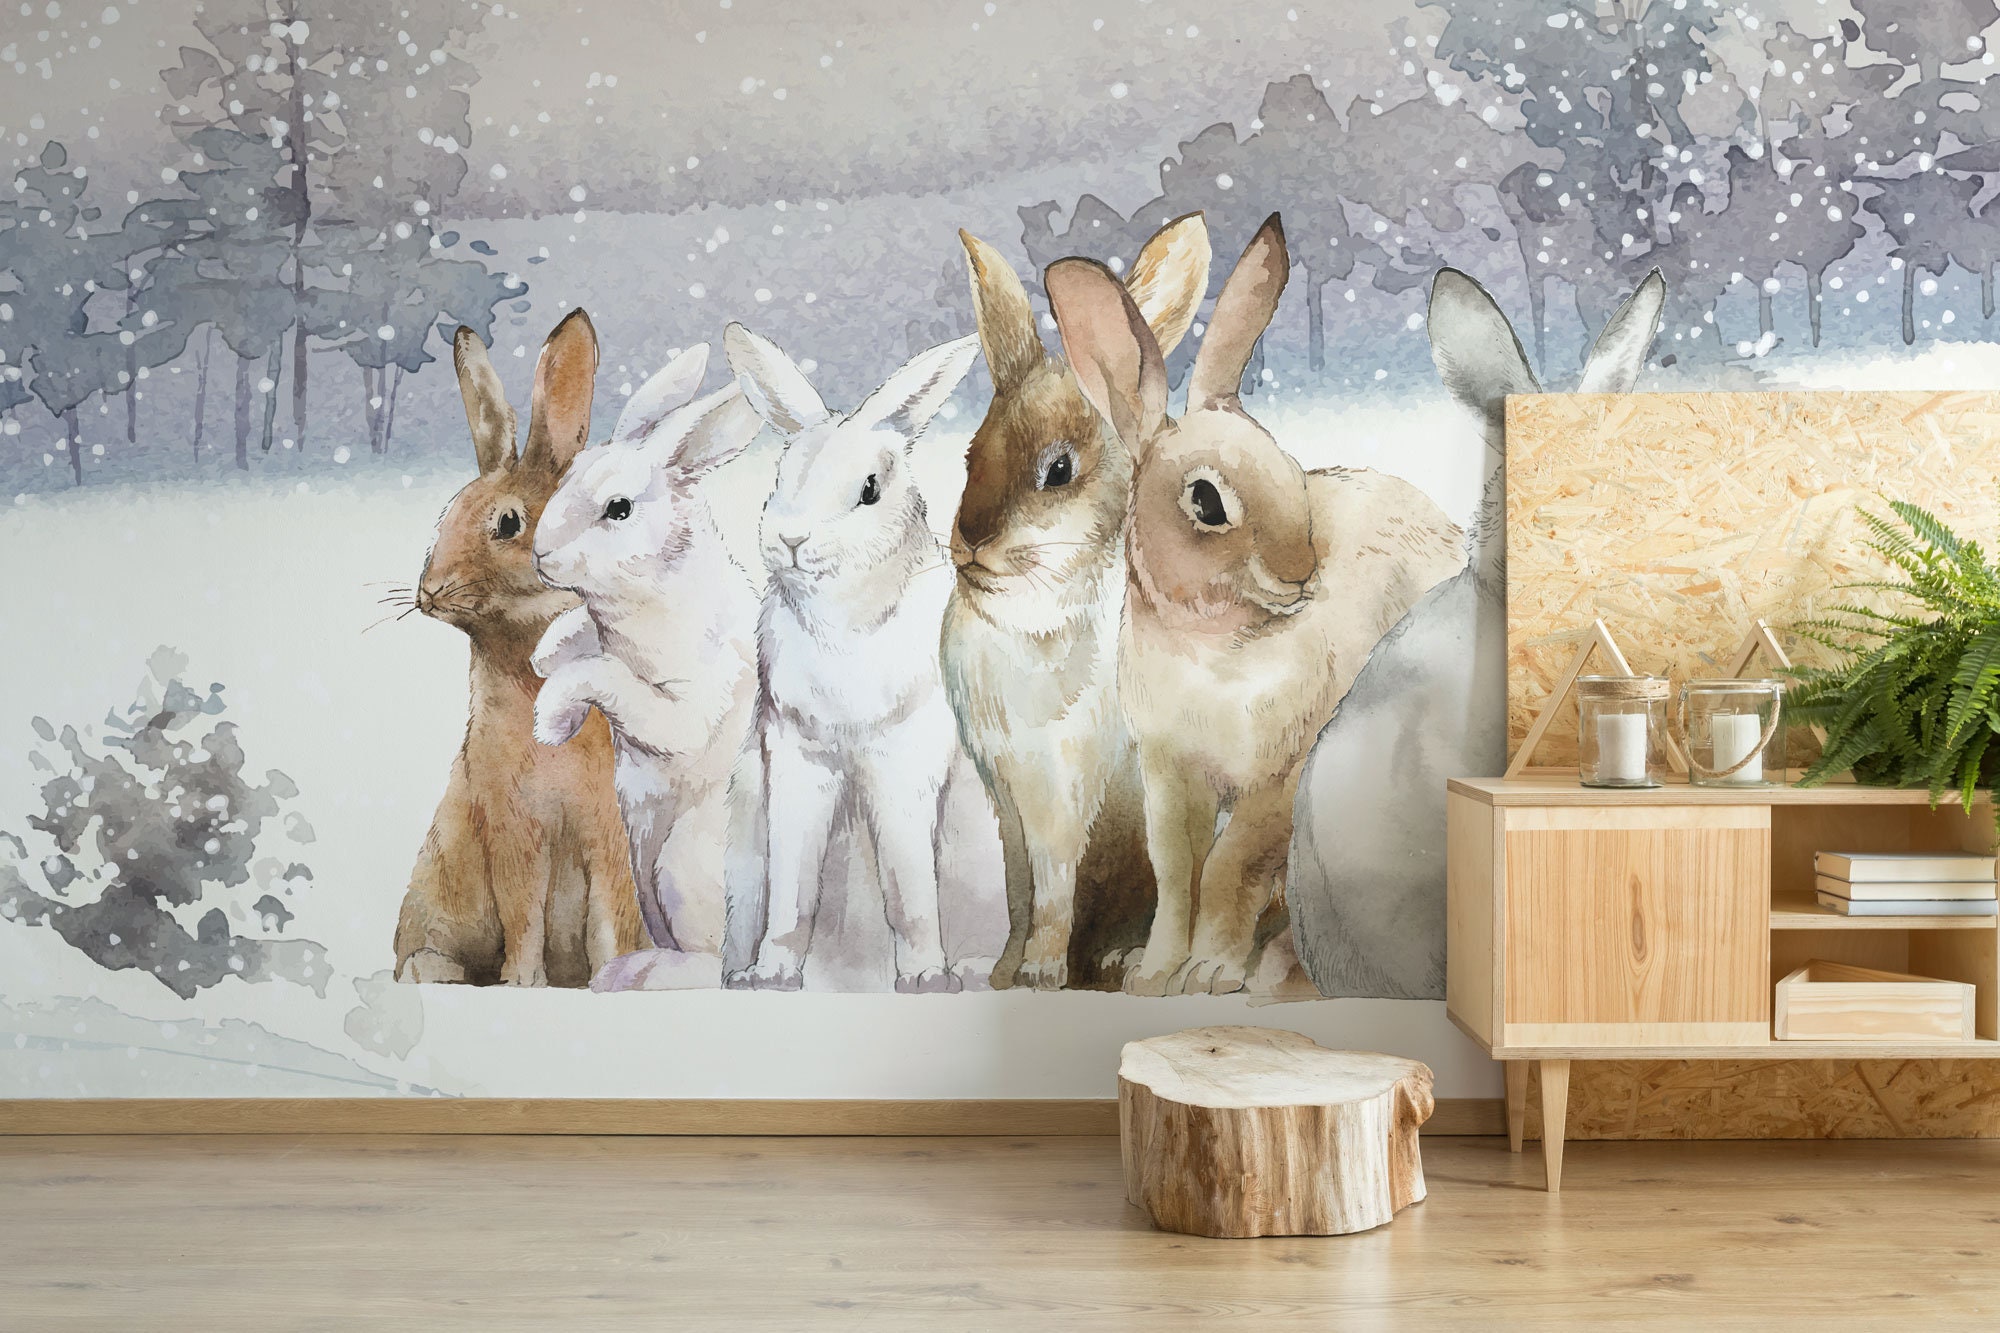 Hare Removable Vinyl Mural / Peel and Stick Rabbits Wallpaper - Etsy